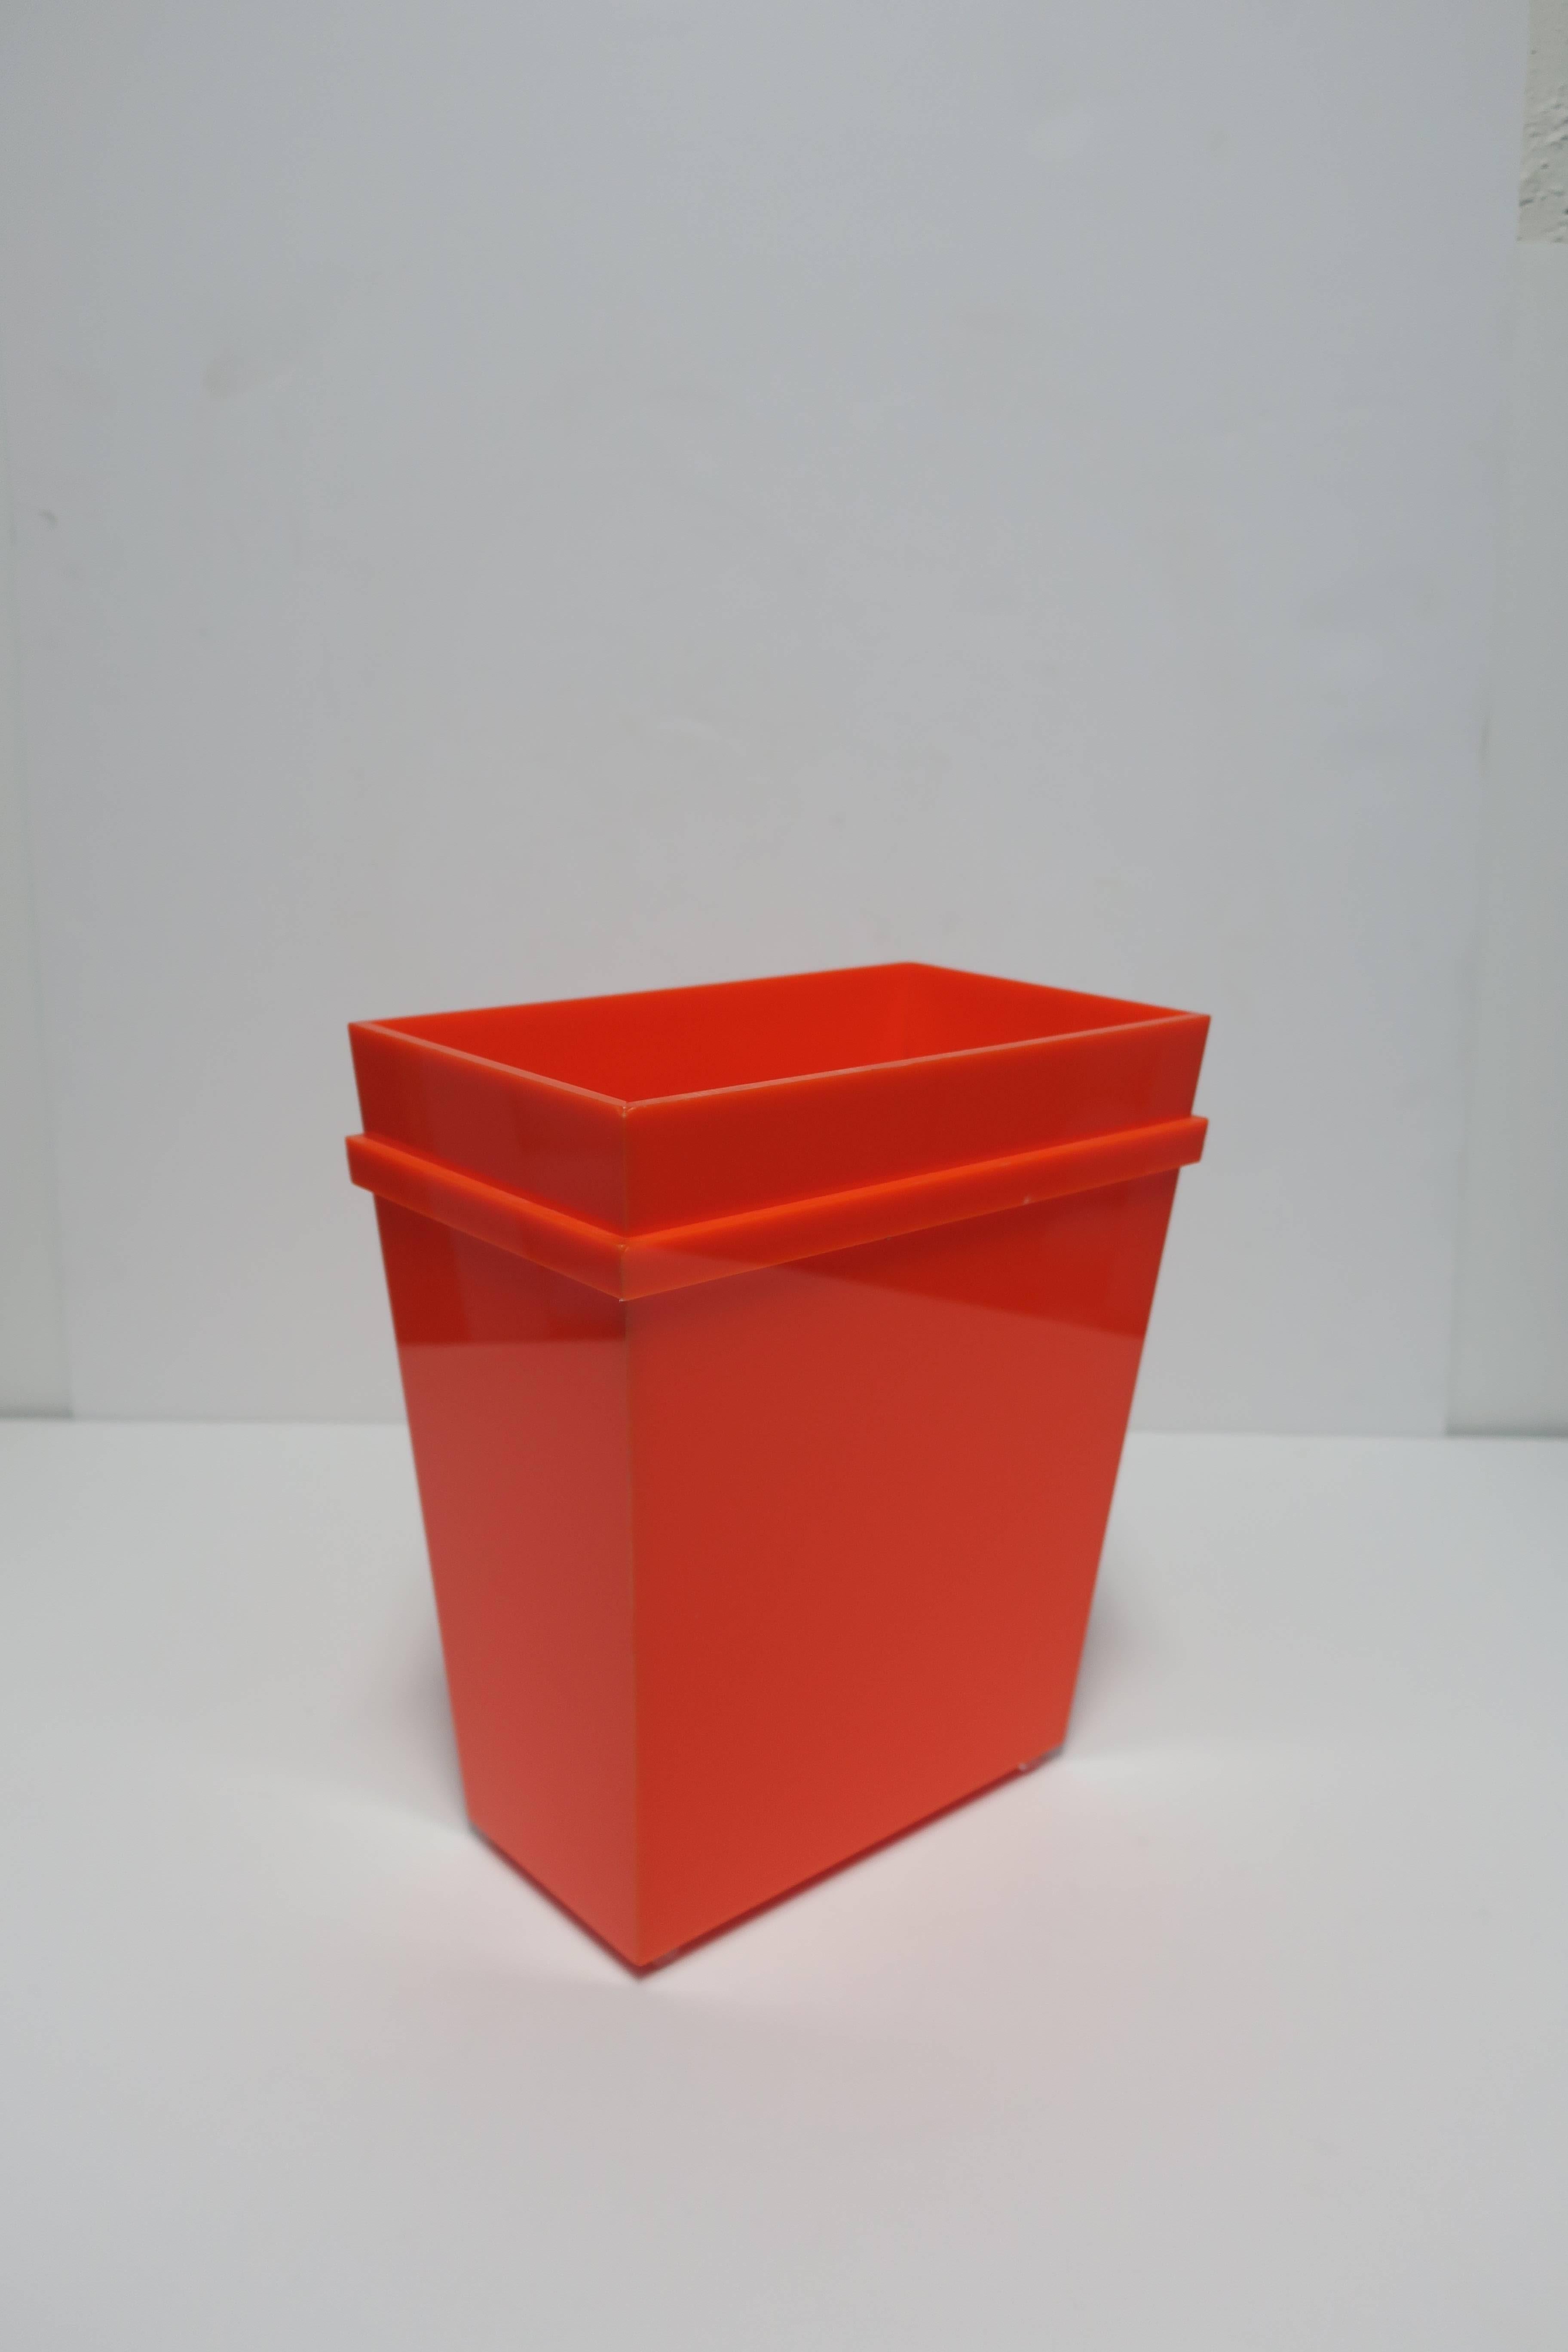 A beautiful and bright Postmodern orange acrylic rectangle wastebasket or trash can. Wastebasket has an orange acrylic band detail around and clear acrylic cylindrical feet.

Item available here online. By request, item can be made available by